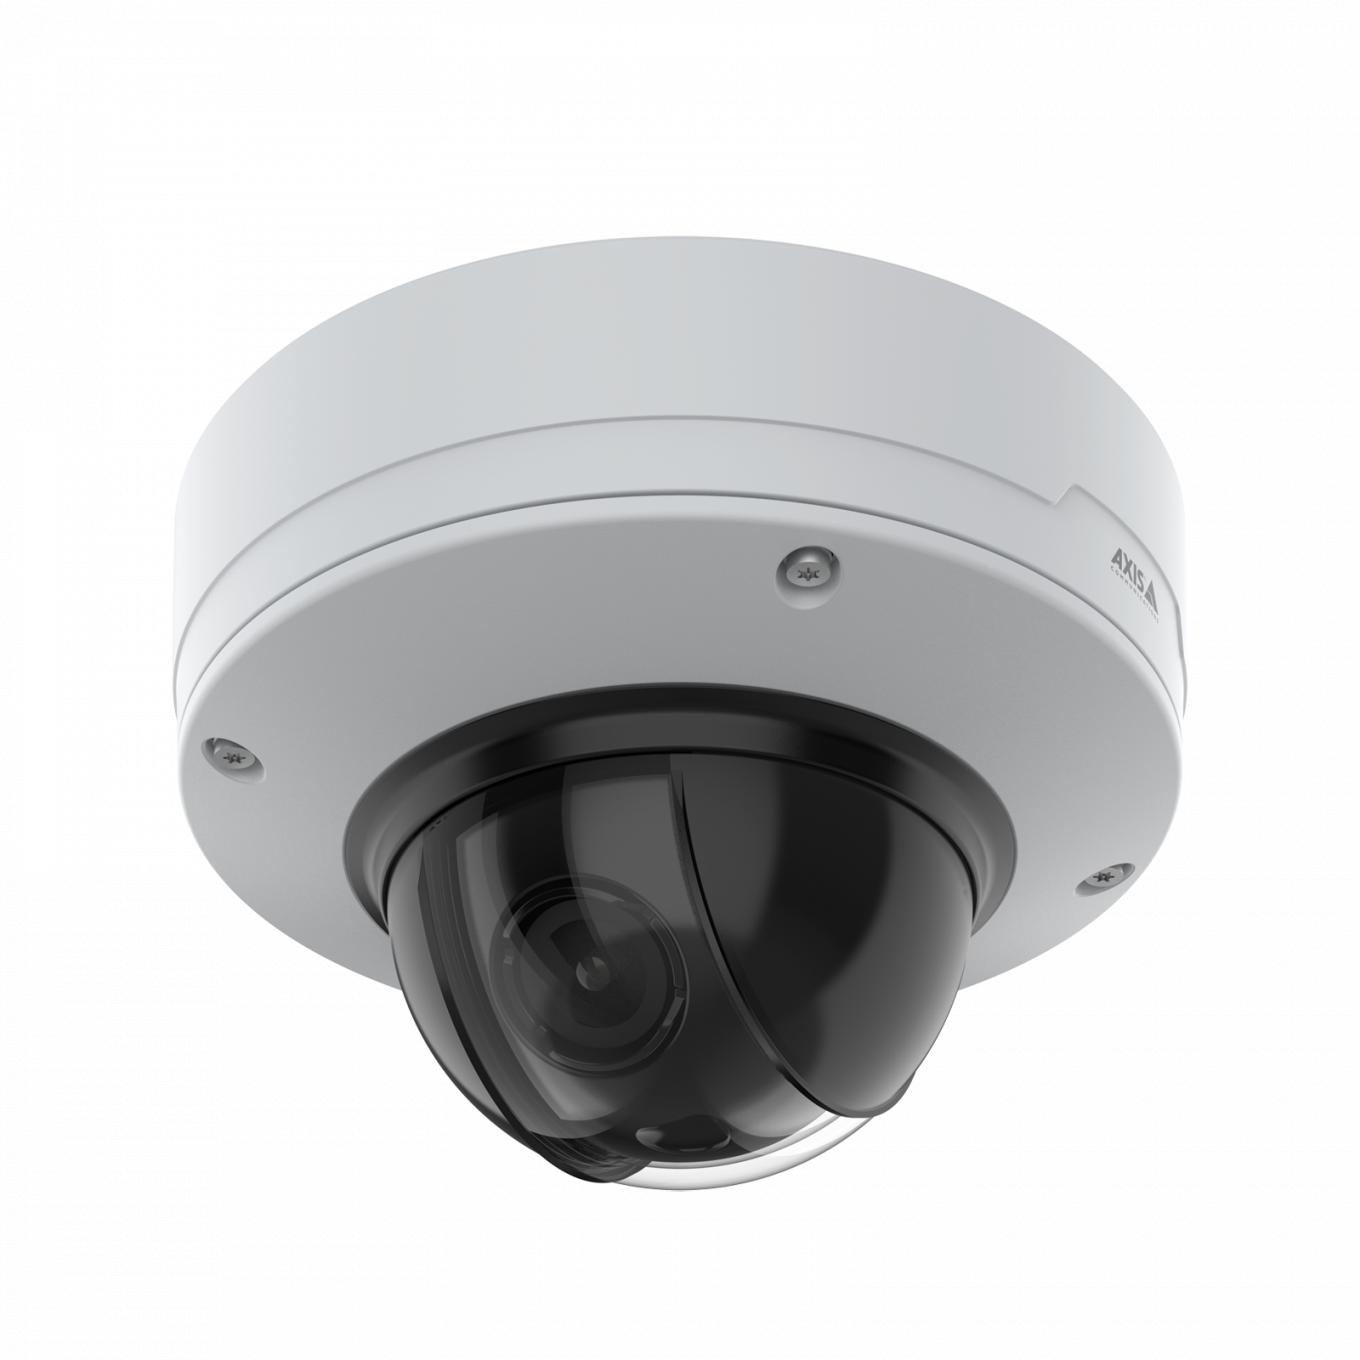 AXIS Q3538-LVE Dome Camera, celing mounted, viewed from its left agle